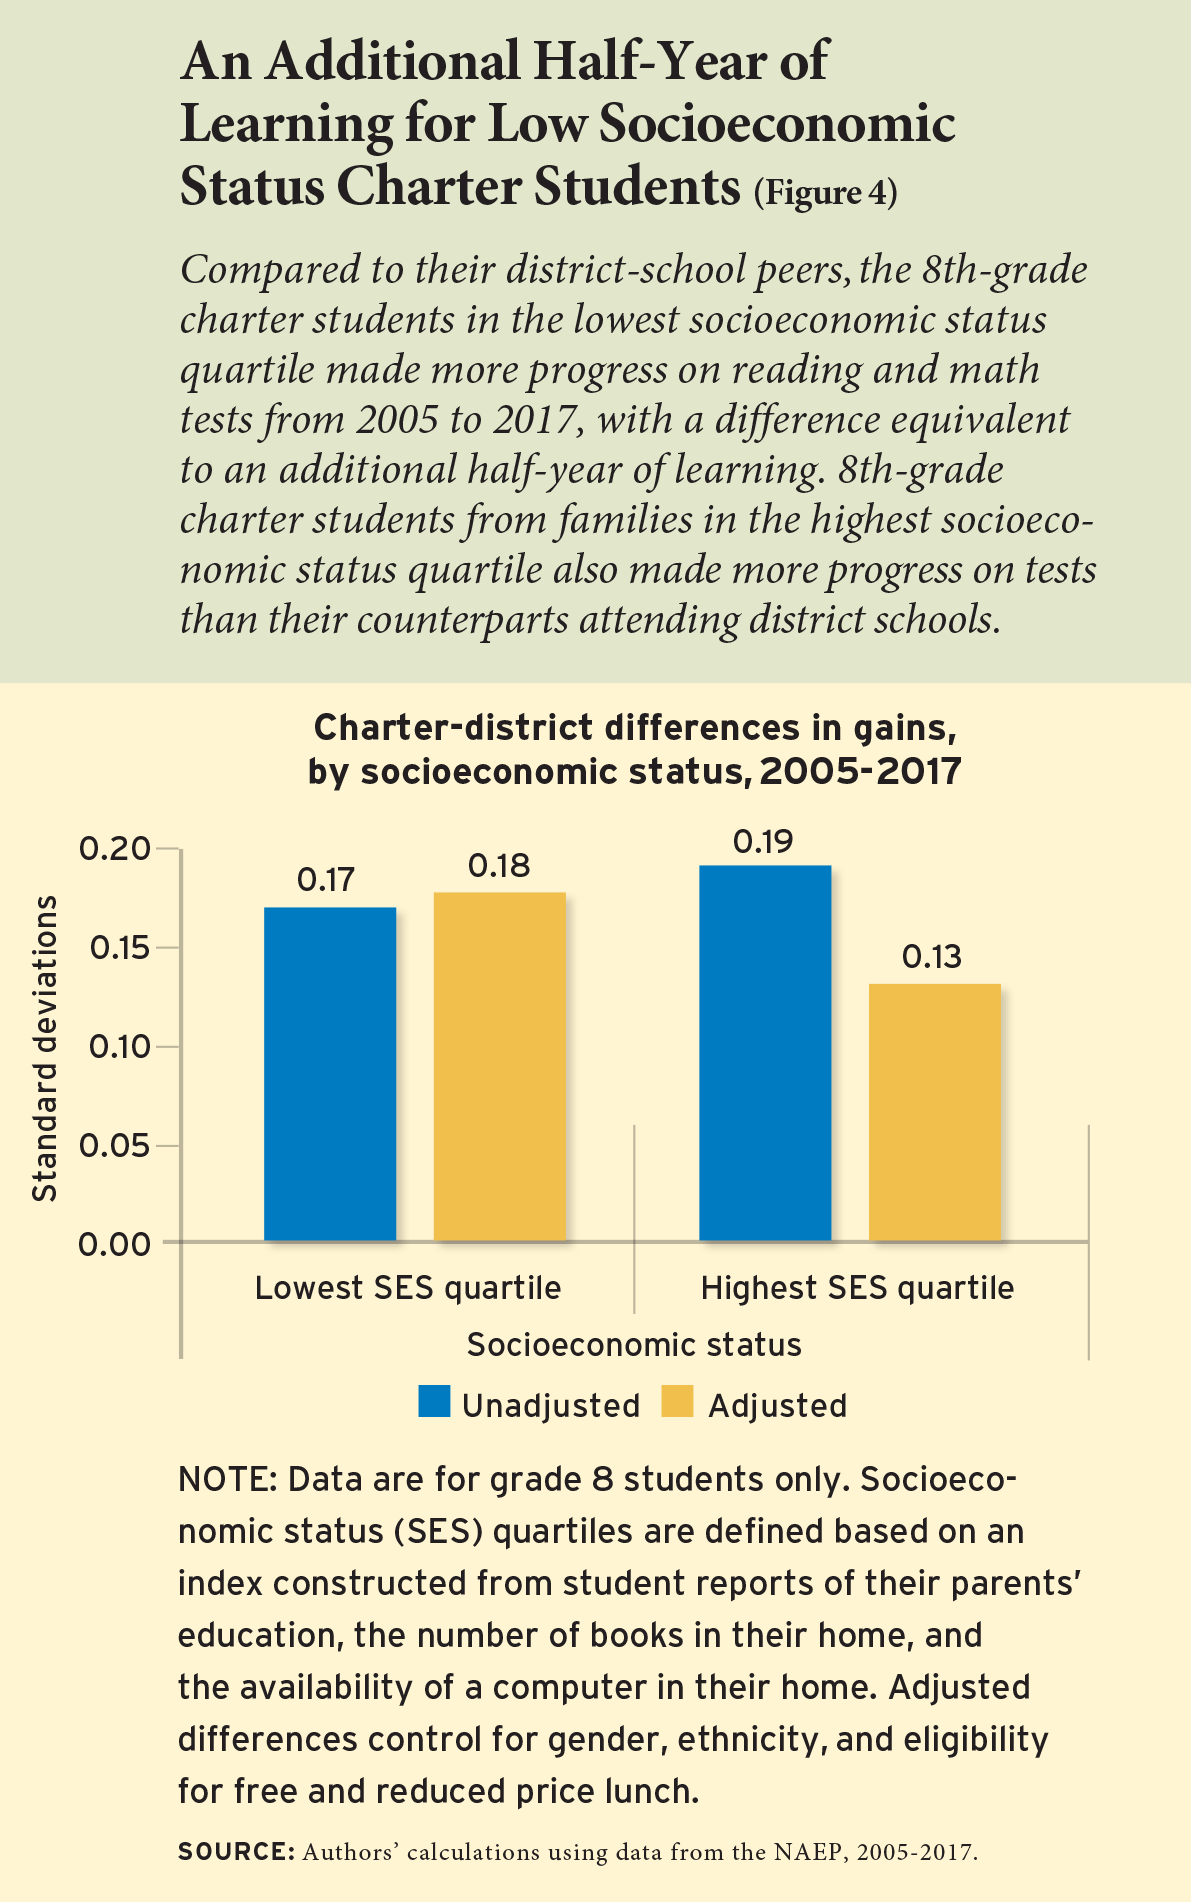 Figure 4 - An Additional Half-Year of Learning for Low Socioeconomic Status Charter Students